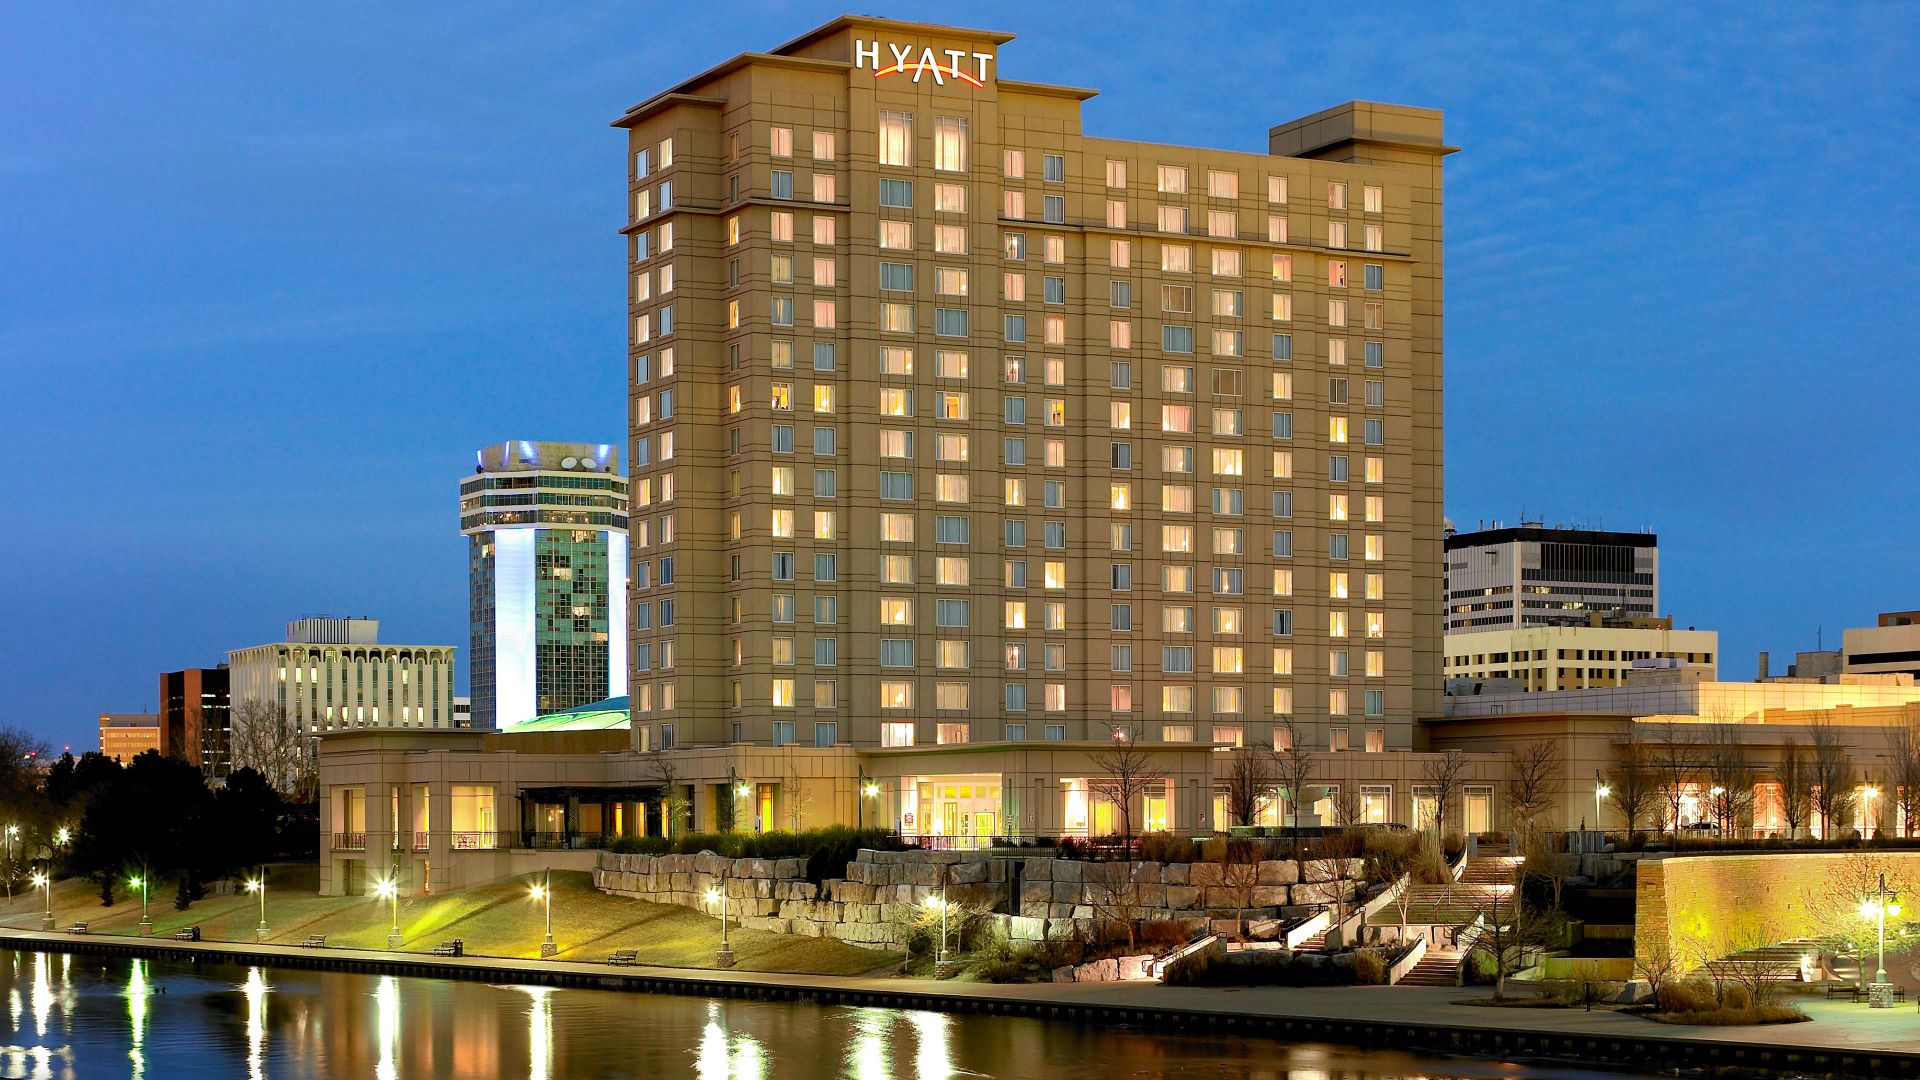 world-of-hyatt-targeted-offers-for-bonus-points-free-night-and-suite